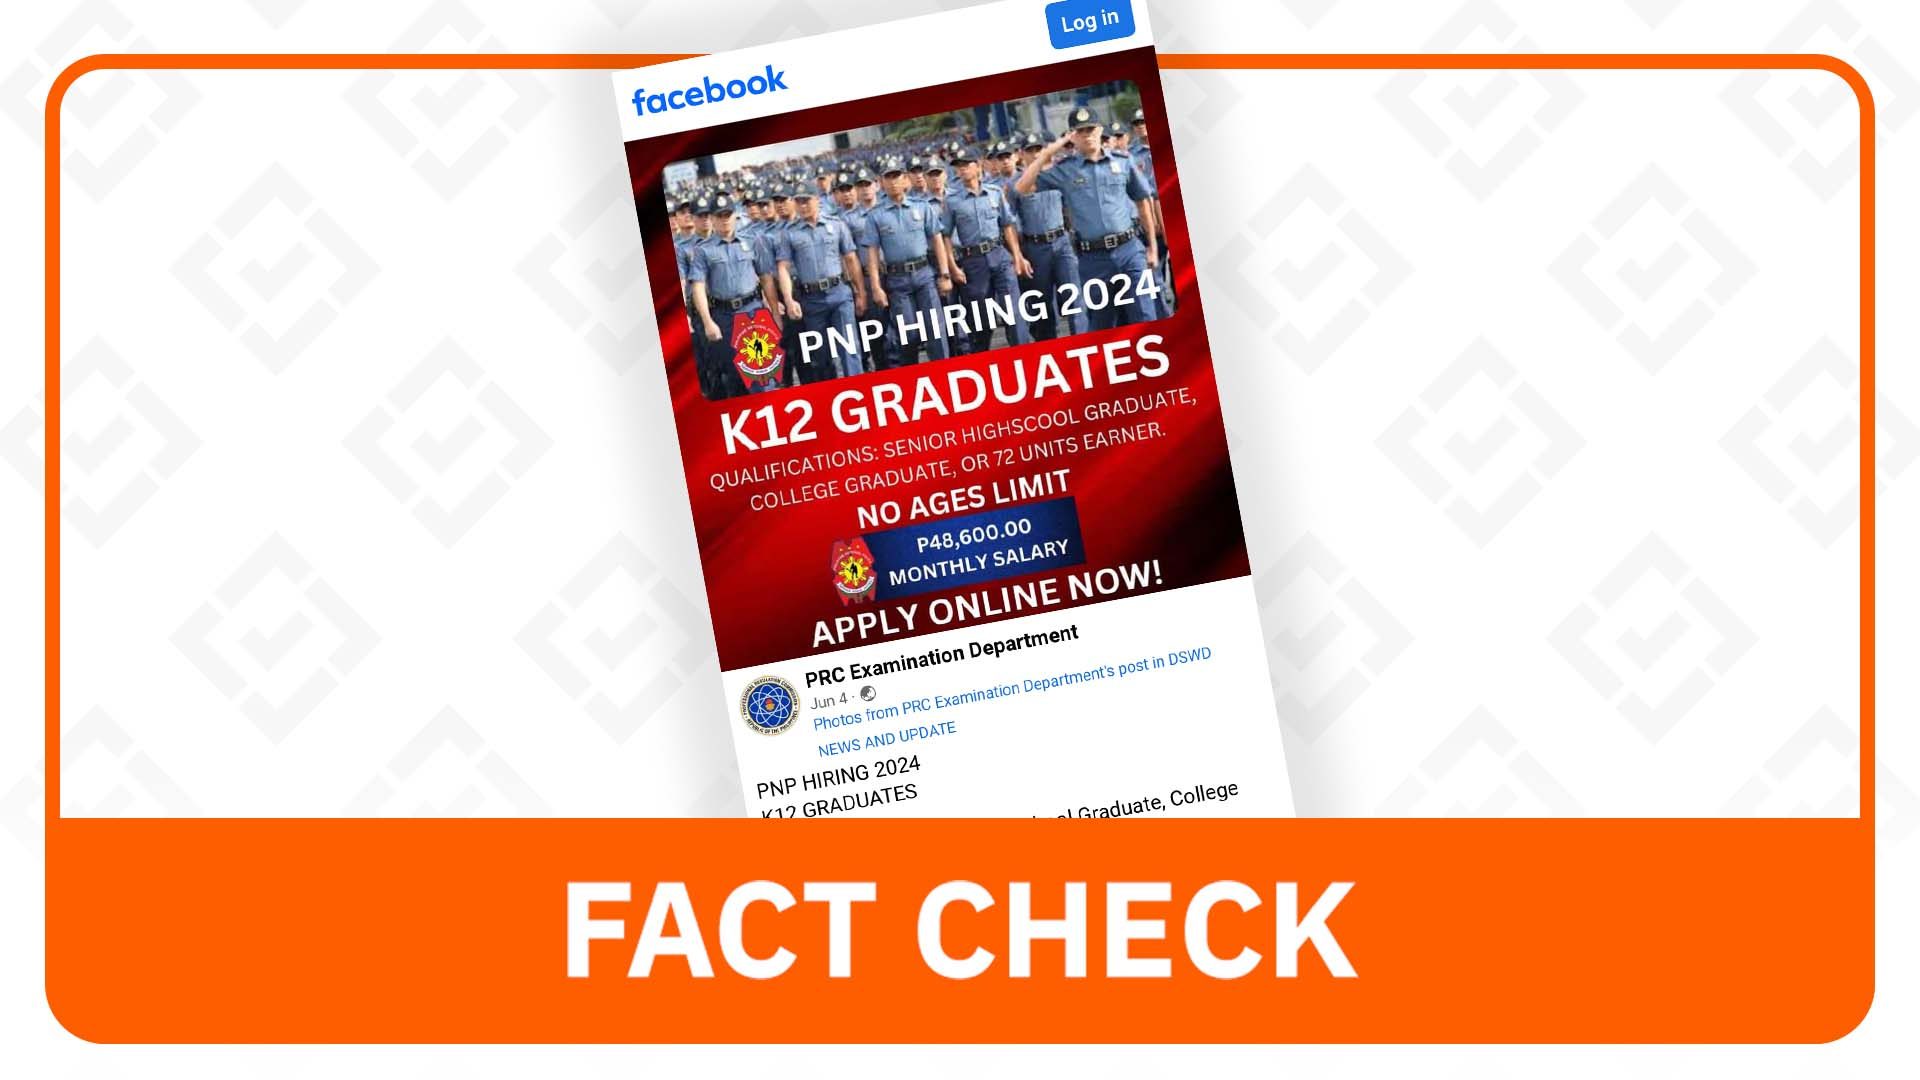 FACT CHECK: Posts on PNP job openings for K to 12 graduates are fake